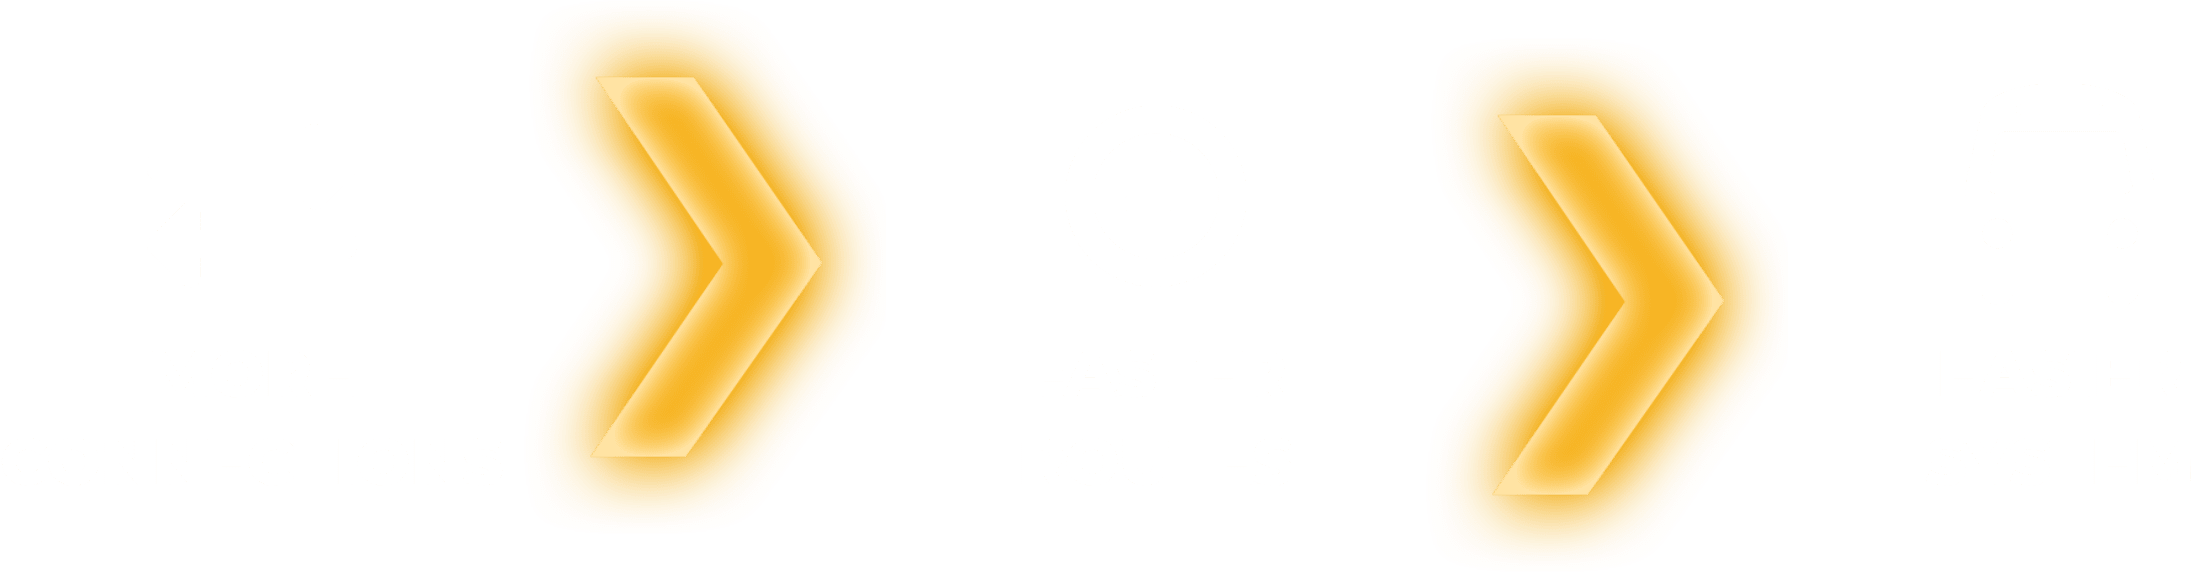 More Connections > Faster Routes > Smarter System